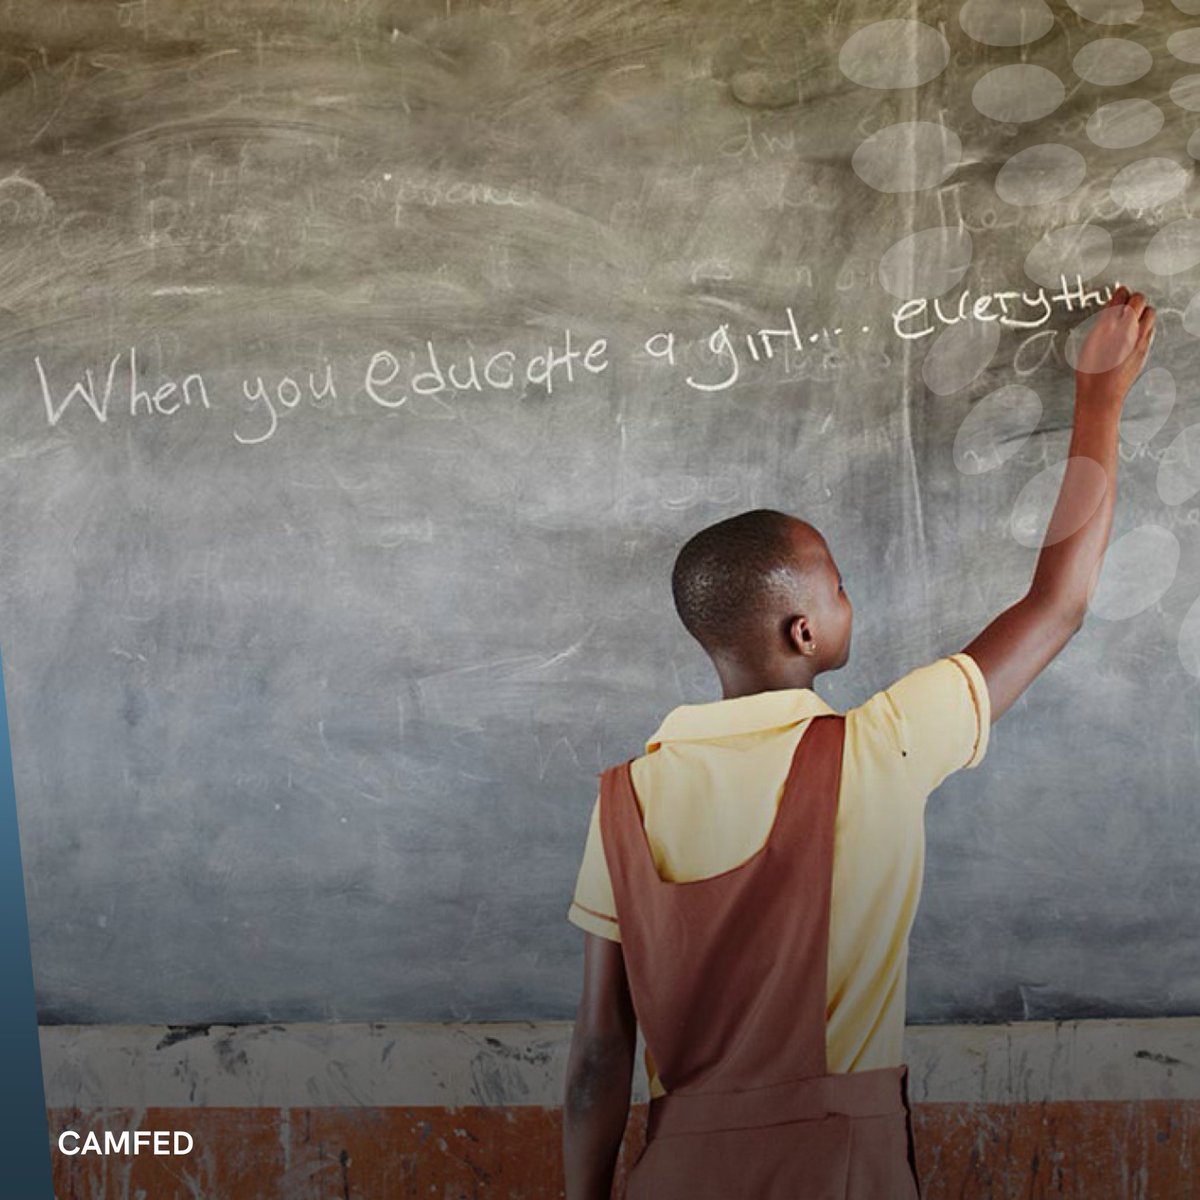 When you educate a girl.. everything changes 🌎 @Camfed has an audacious goal of supporting 5 million girls to thrive in secondary school across Africa by 2030. Read more here: audaciousproject.org/grantees/camfed #AudaciousProject